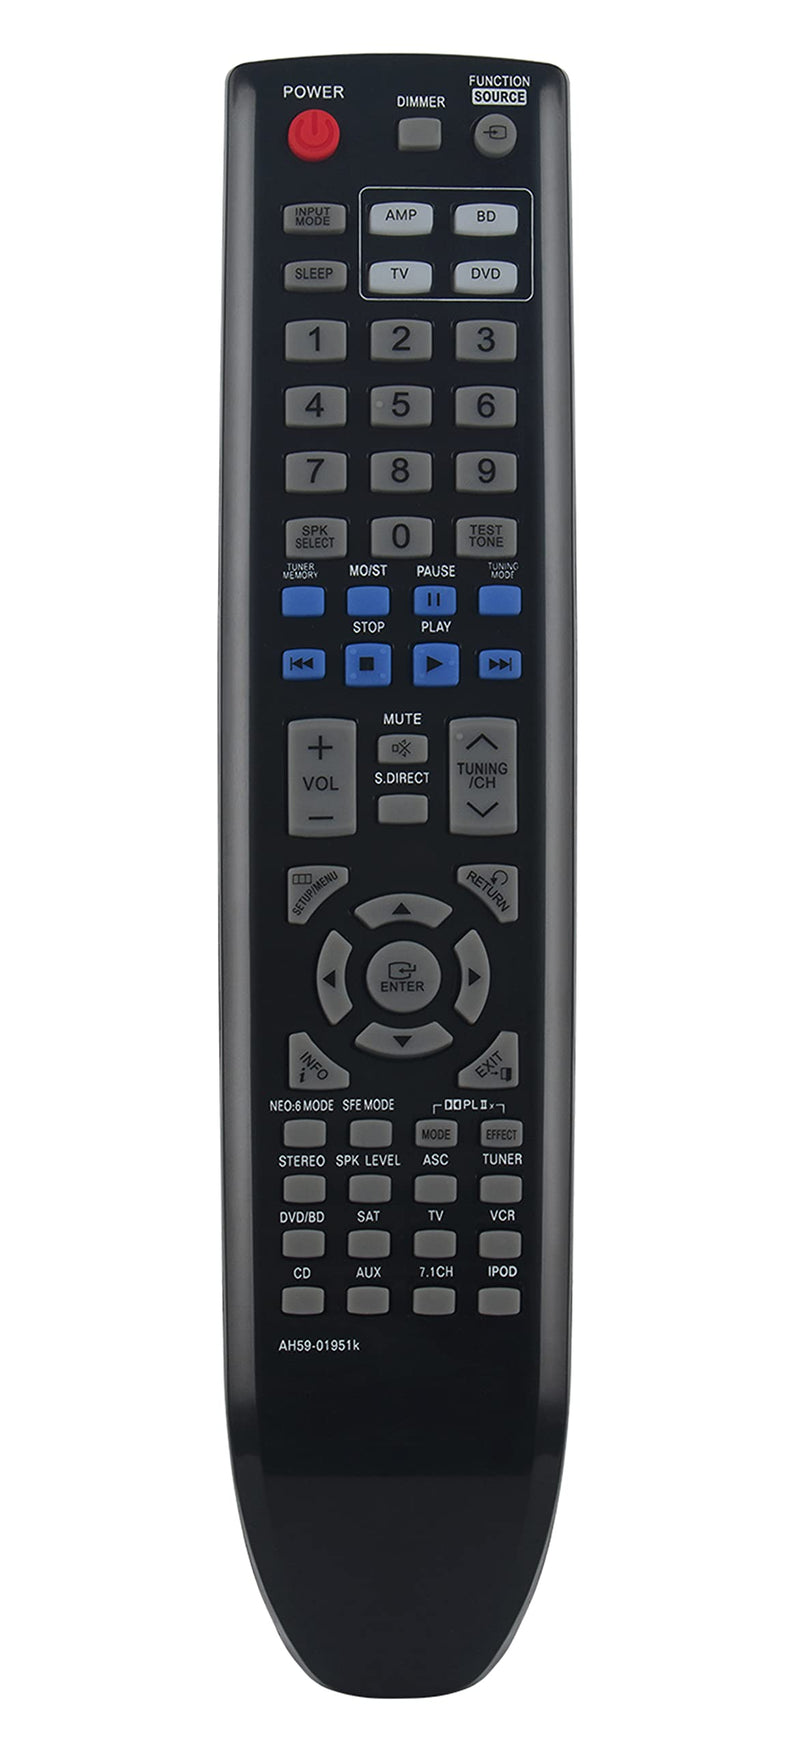  [AUSTRALIA] - AH59-01951K Replaced Remote fit for Samsung AV Receiver HT-AS730S HT-AS730ST HT-AS730 Home Theater Audio